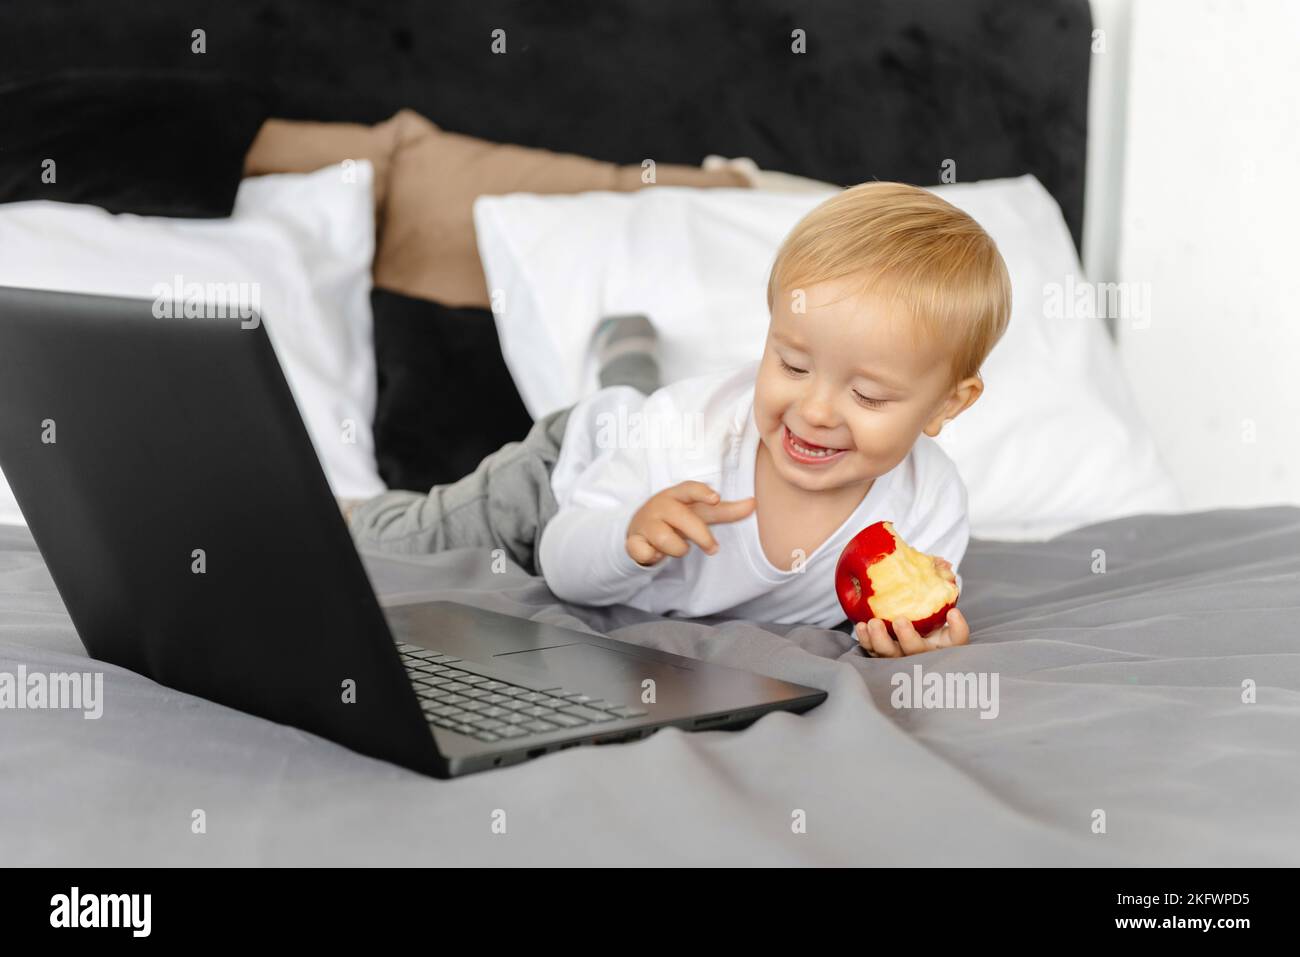 Cute kid is looking at a laptop and holding an apple, the rebonk is playing with the laptop Stock Photo